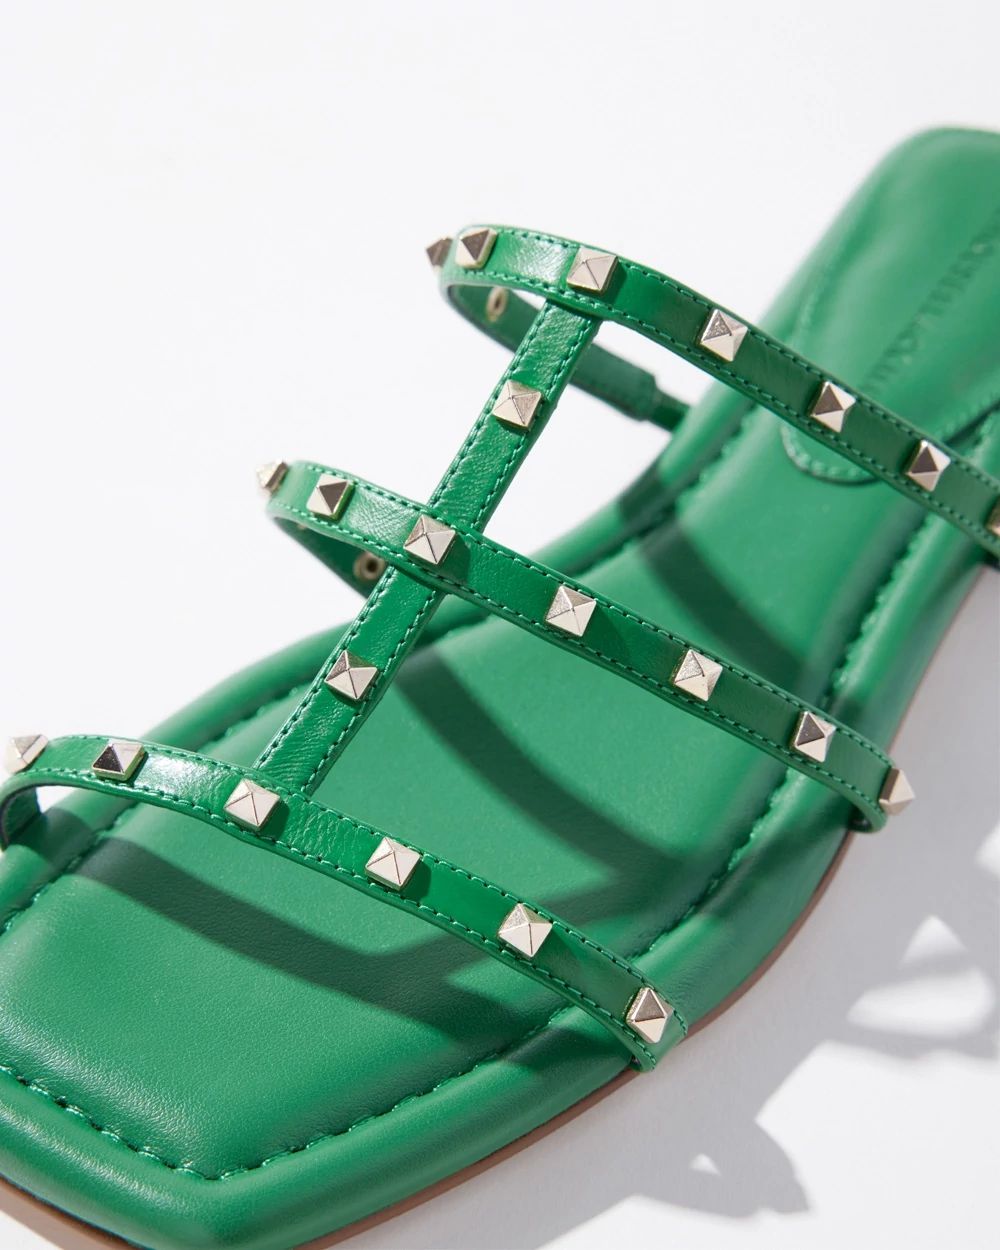 Brooklyn Studded Flat Sandal click to view larger image.